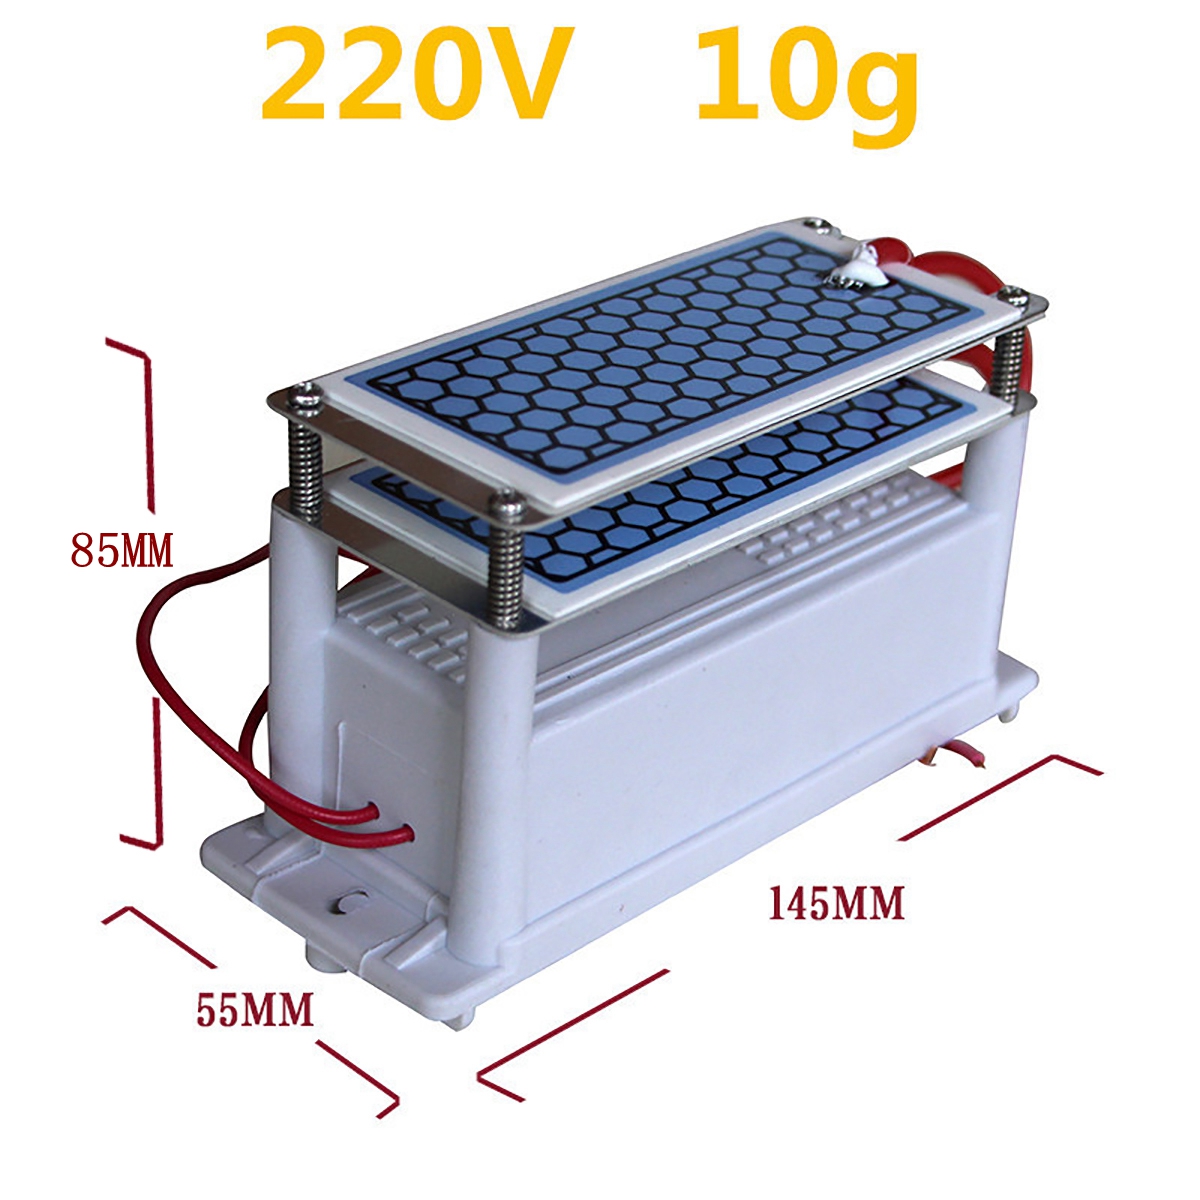 10g-Ozone-Generator-Ozone-Disinfection-Machine-Home--Commercial-Air-Purifier-Cleaner-Ozone-Generator-1716600-4